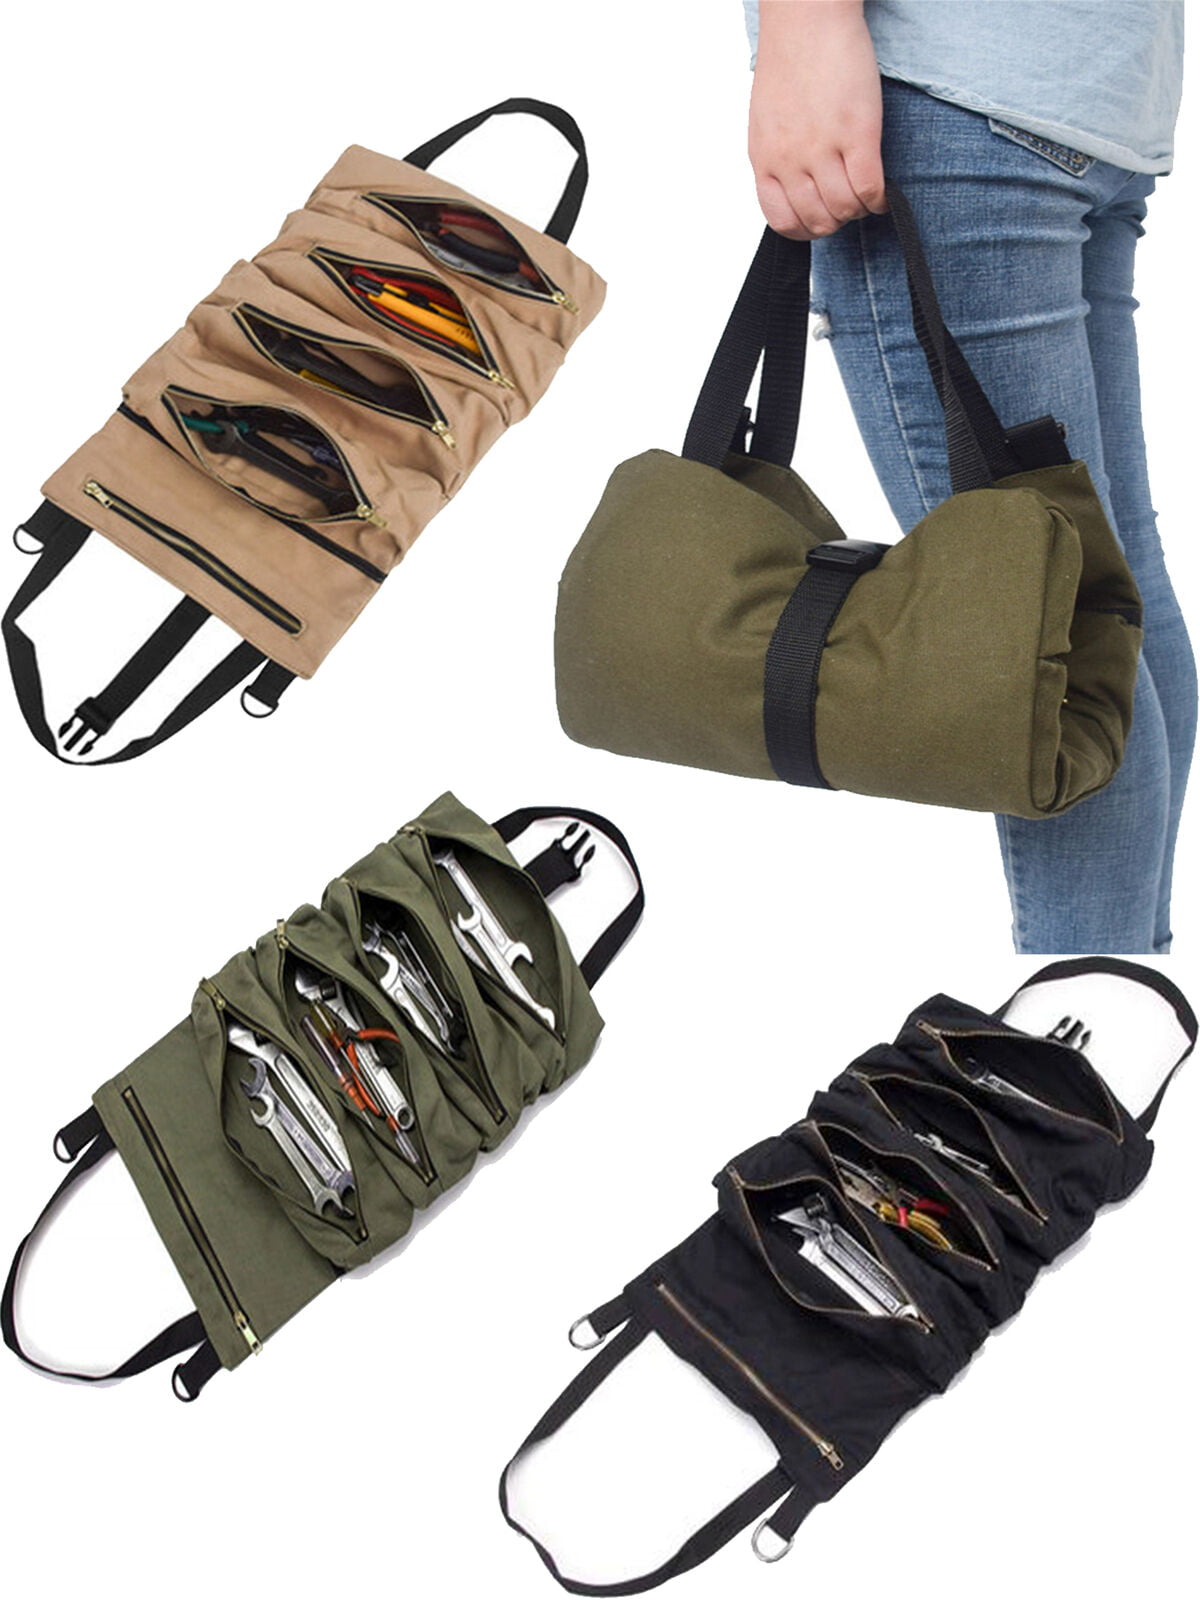 Details about   Tool Bag Organizer Roll Up Canvas Pouch Tools Tote Carrier Holder Sling 